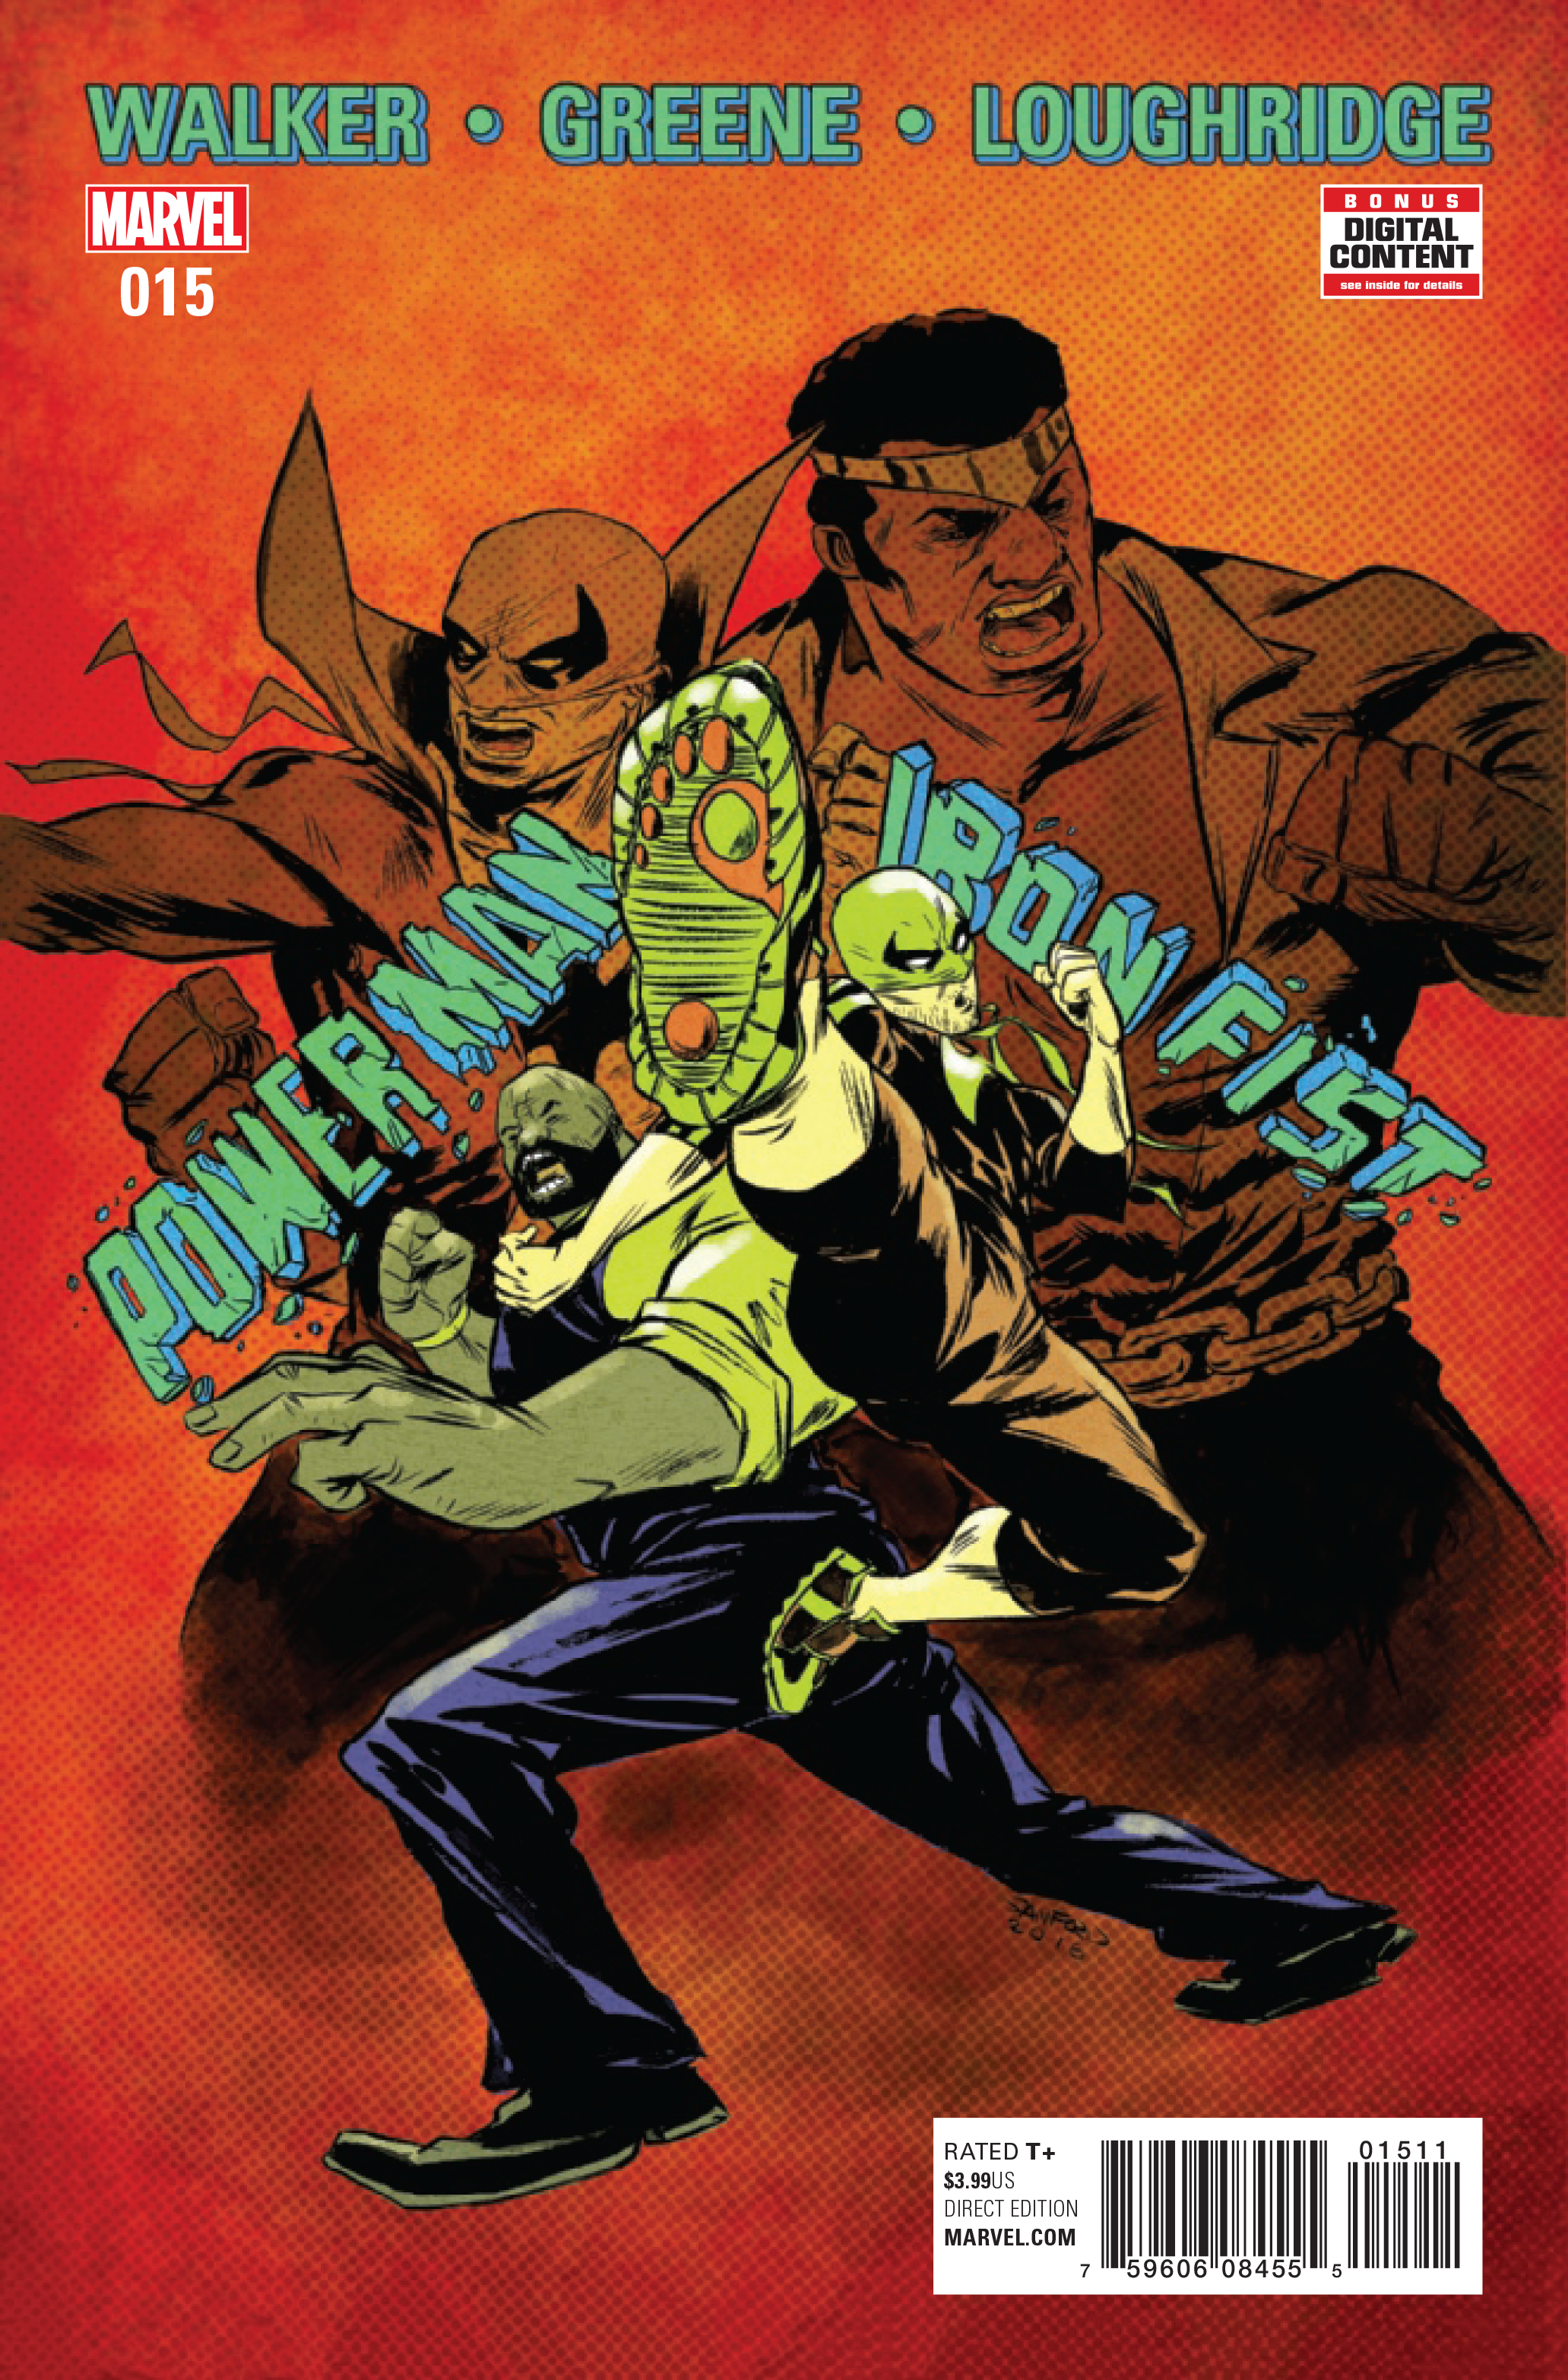 POWER MAN AND IRON FIST #15